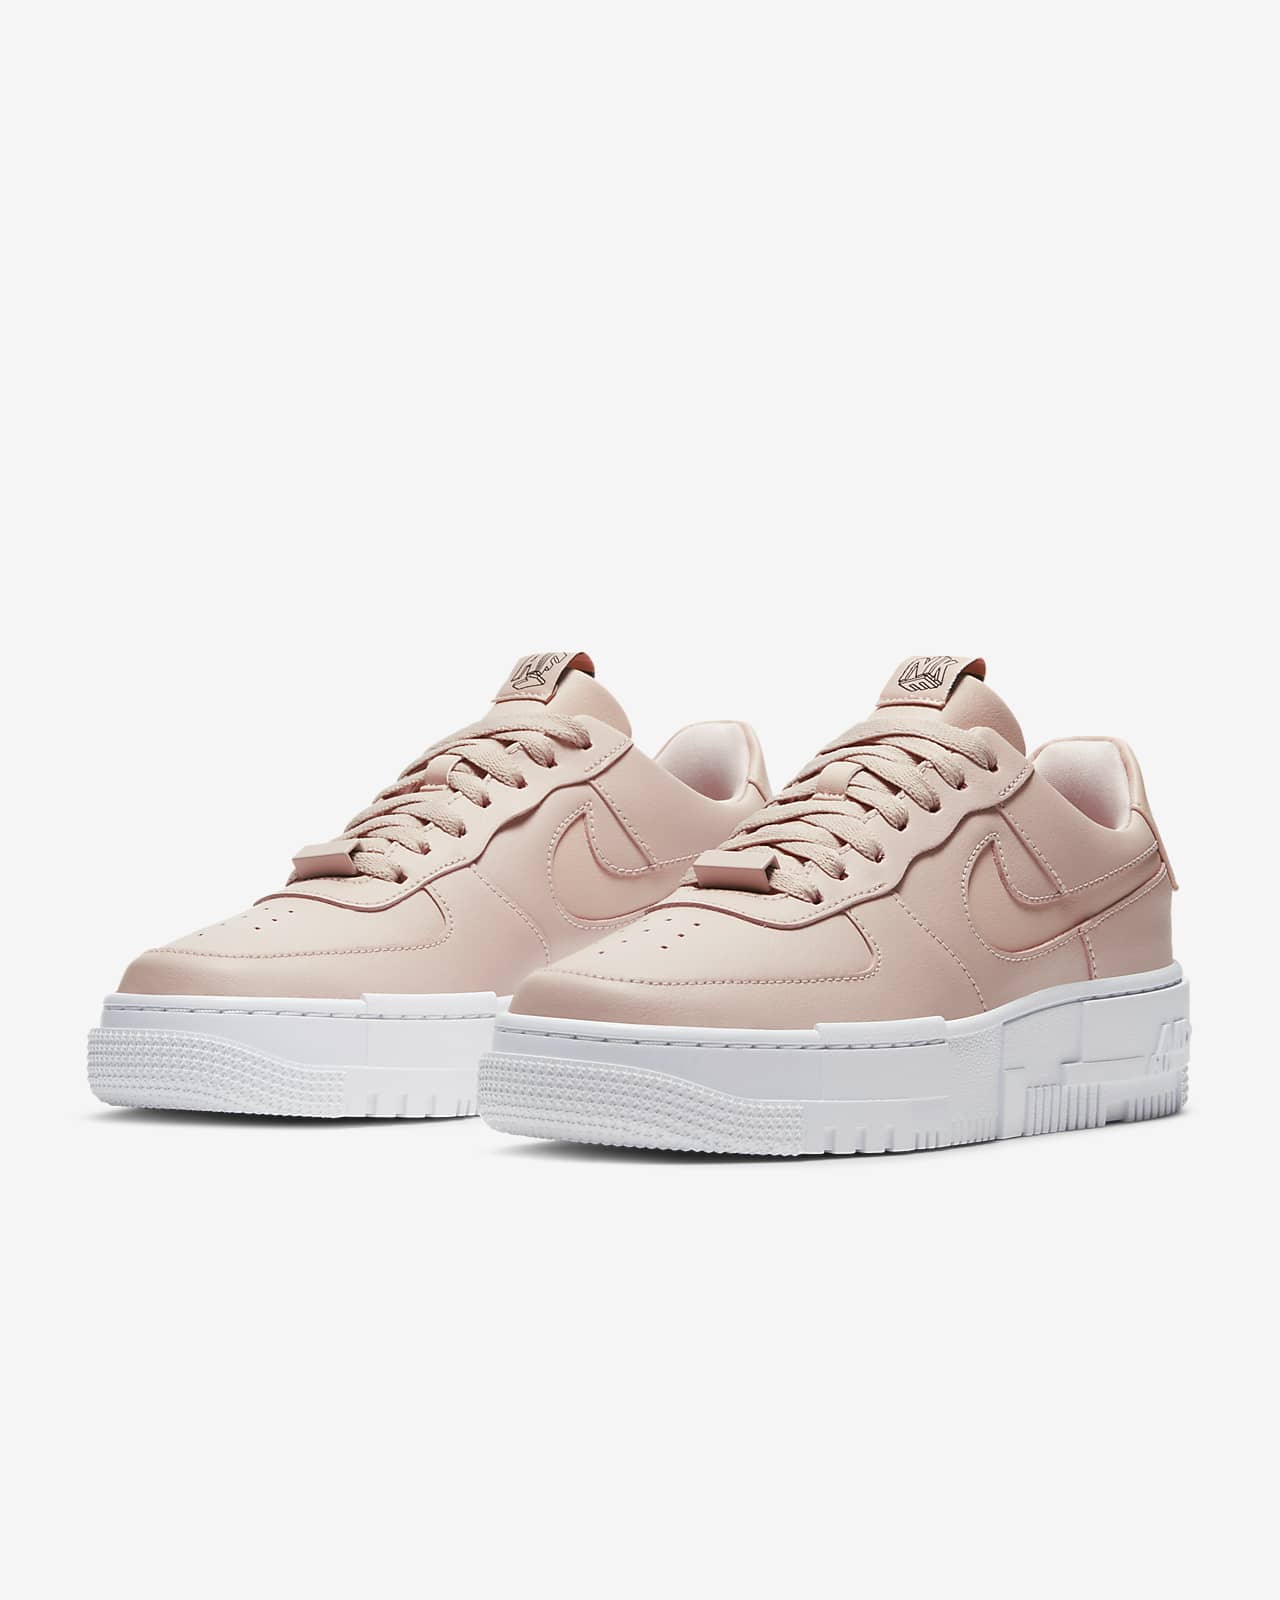 air force one women